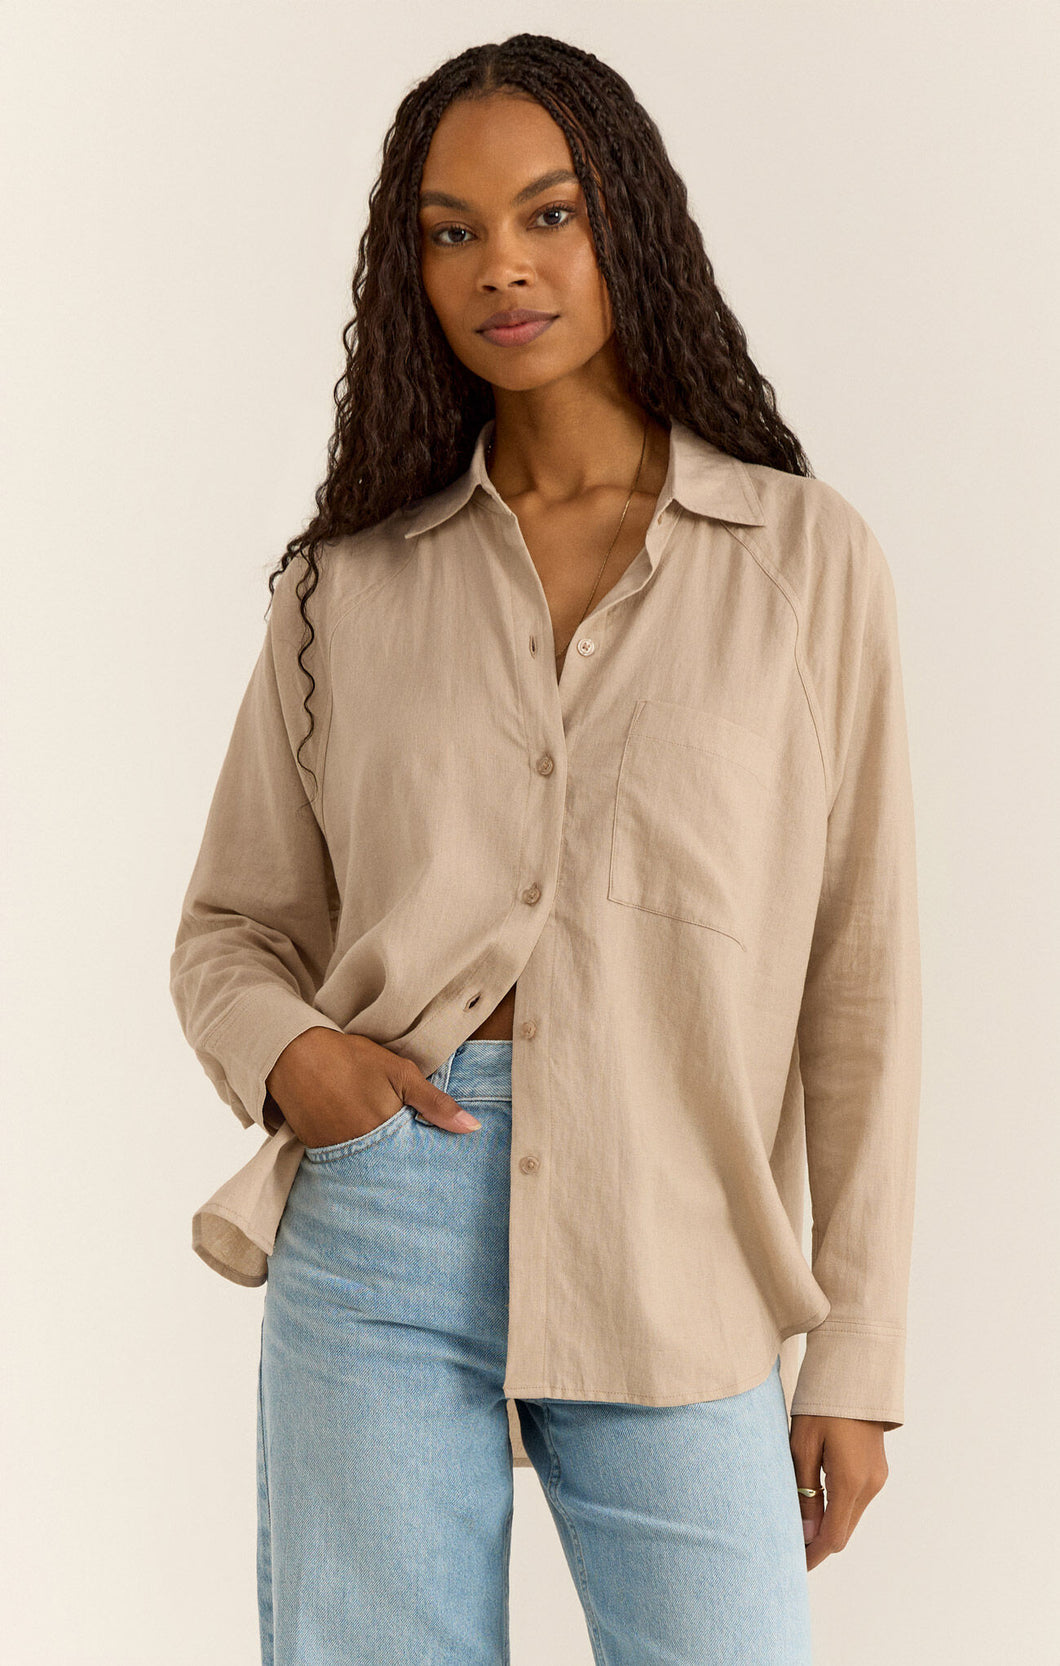 Z Supply: The Perfect Linen Top in Putty